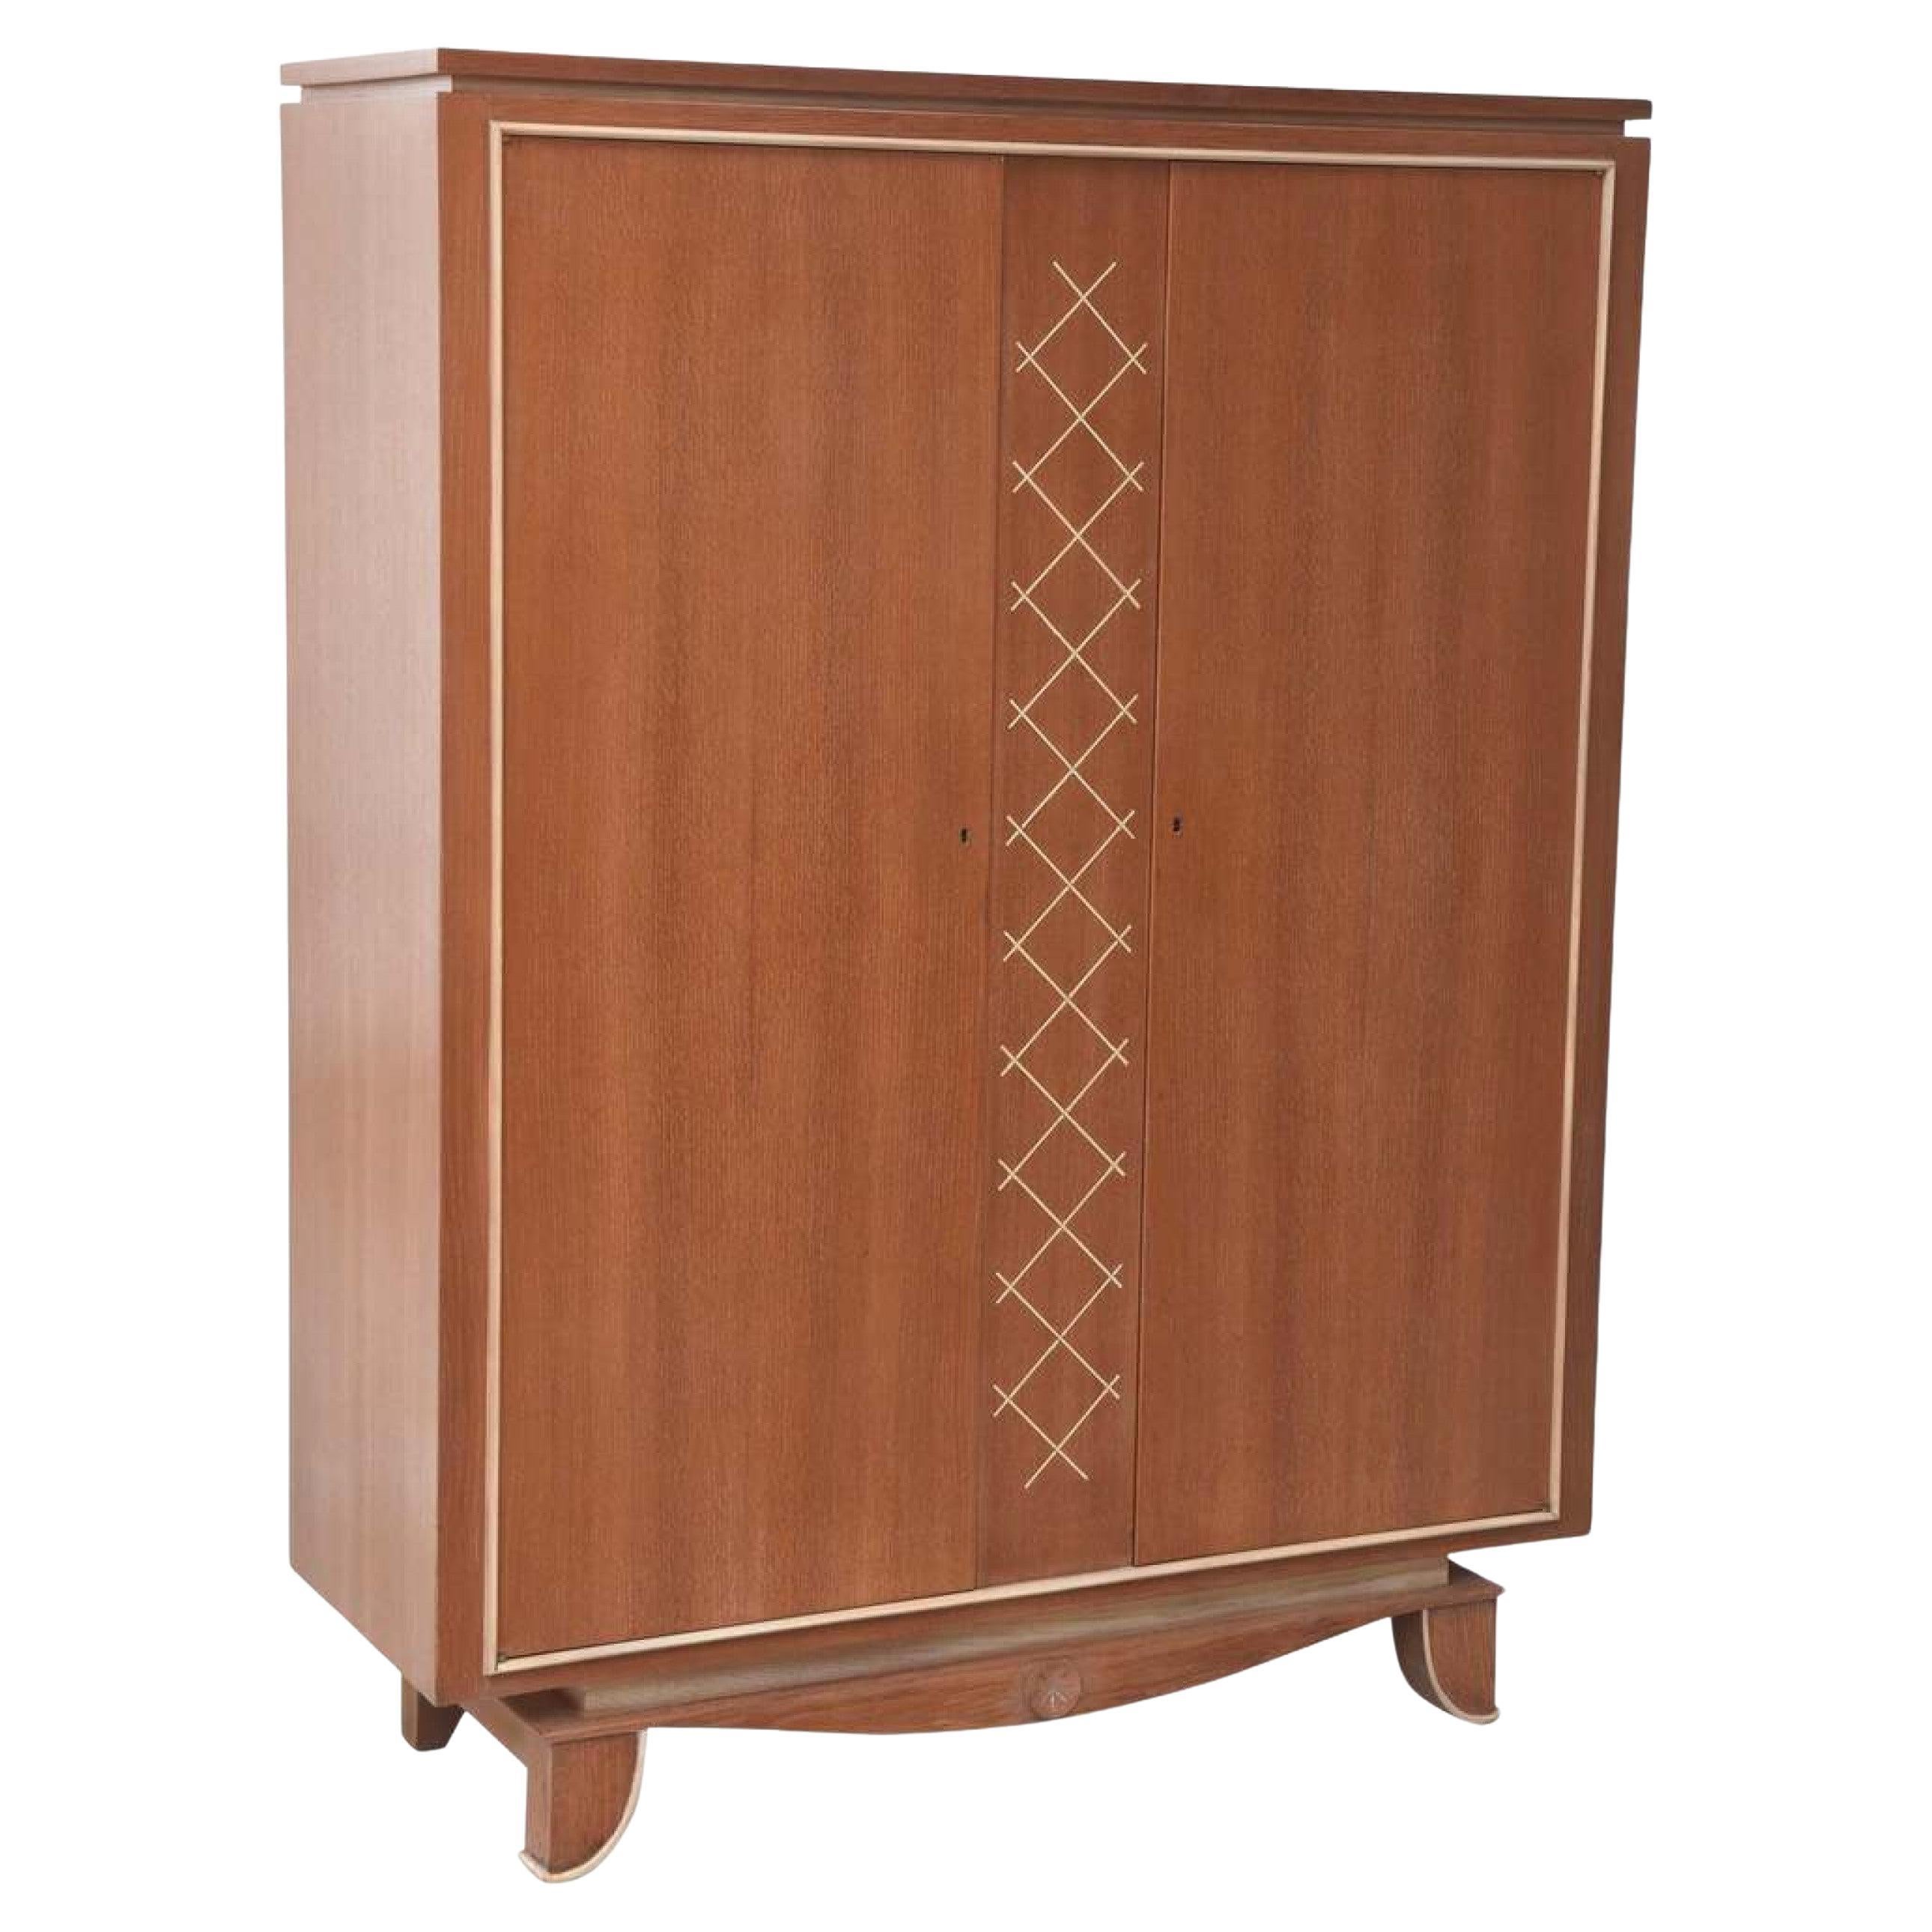 Pierre Petit Midcentury French Modern Limed Oak and Parchment Tall Cabinet